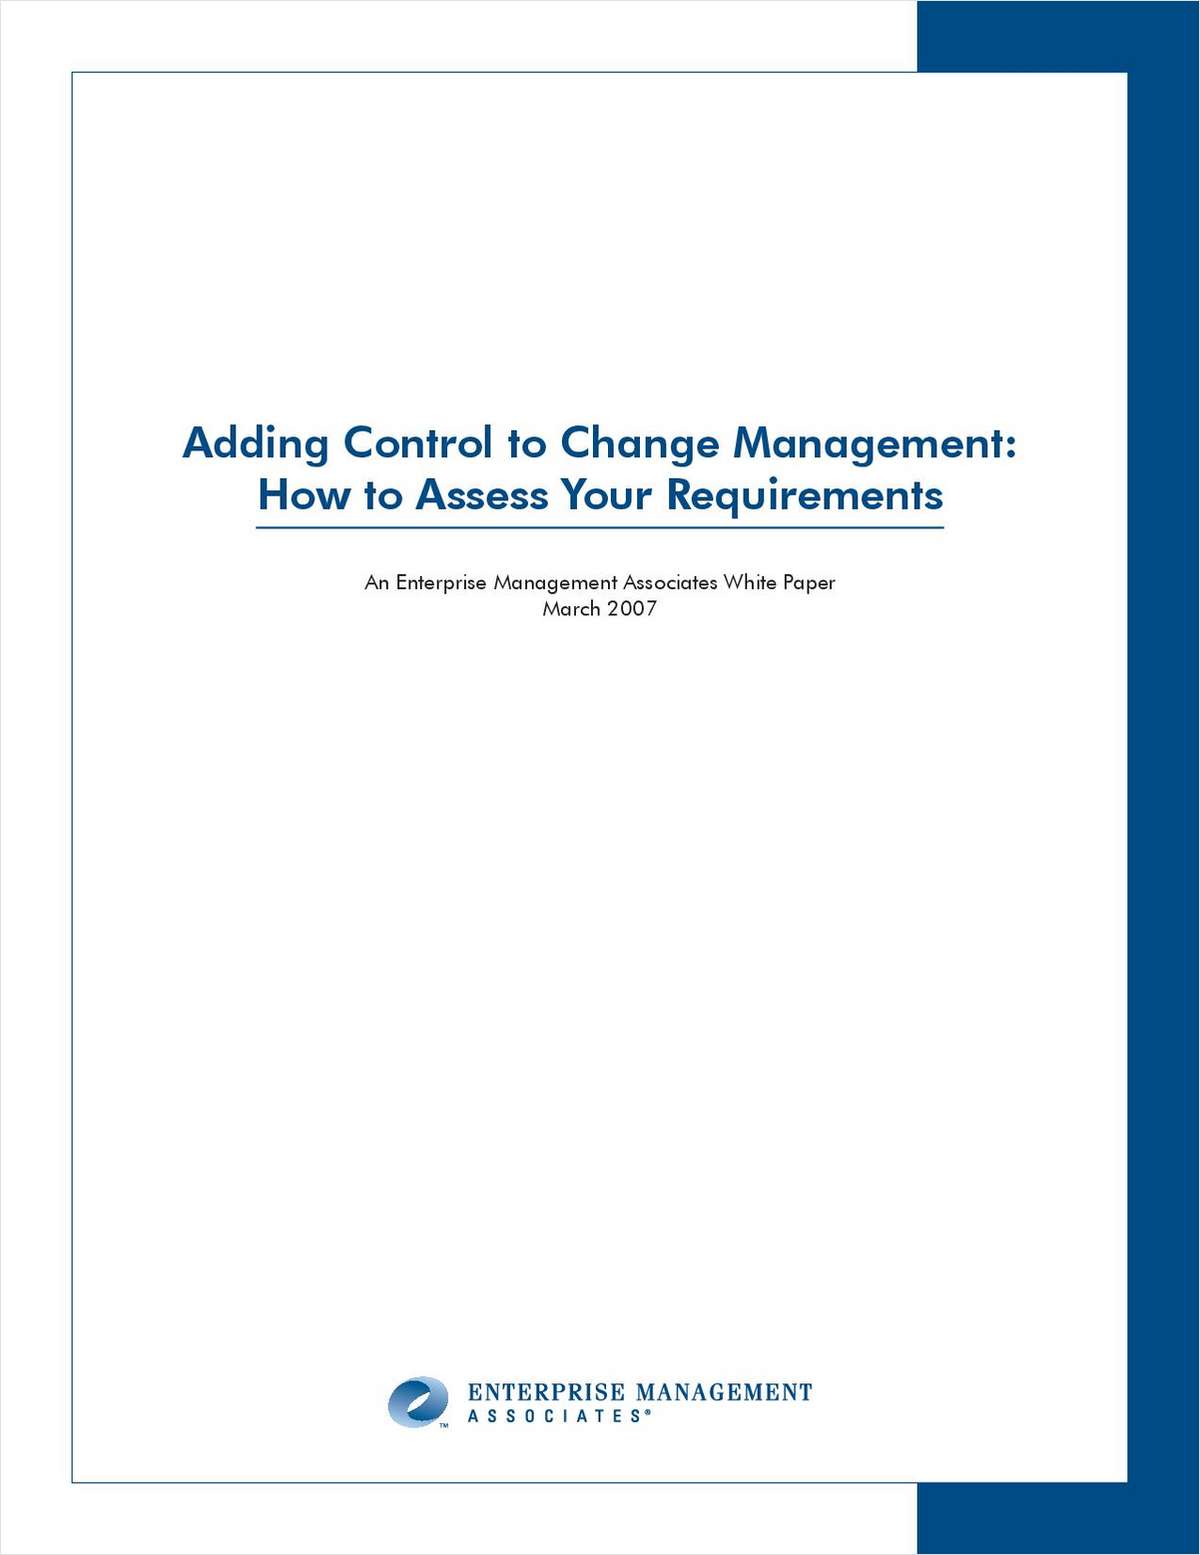 Adding Control to Change Management: How to Assess Your Requirements